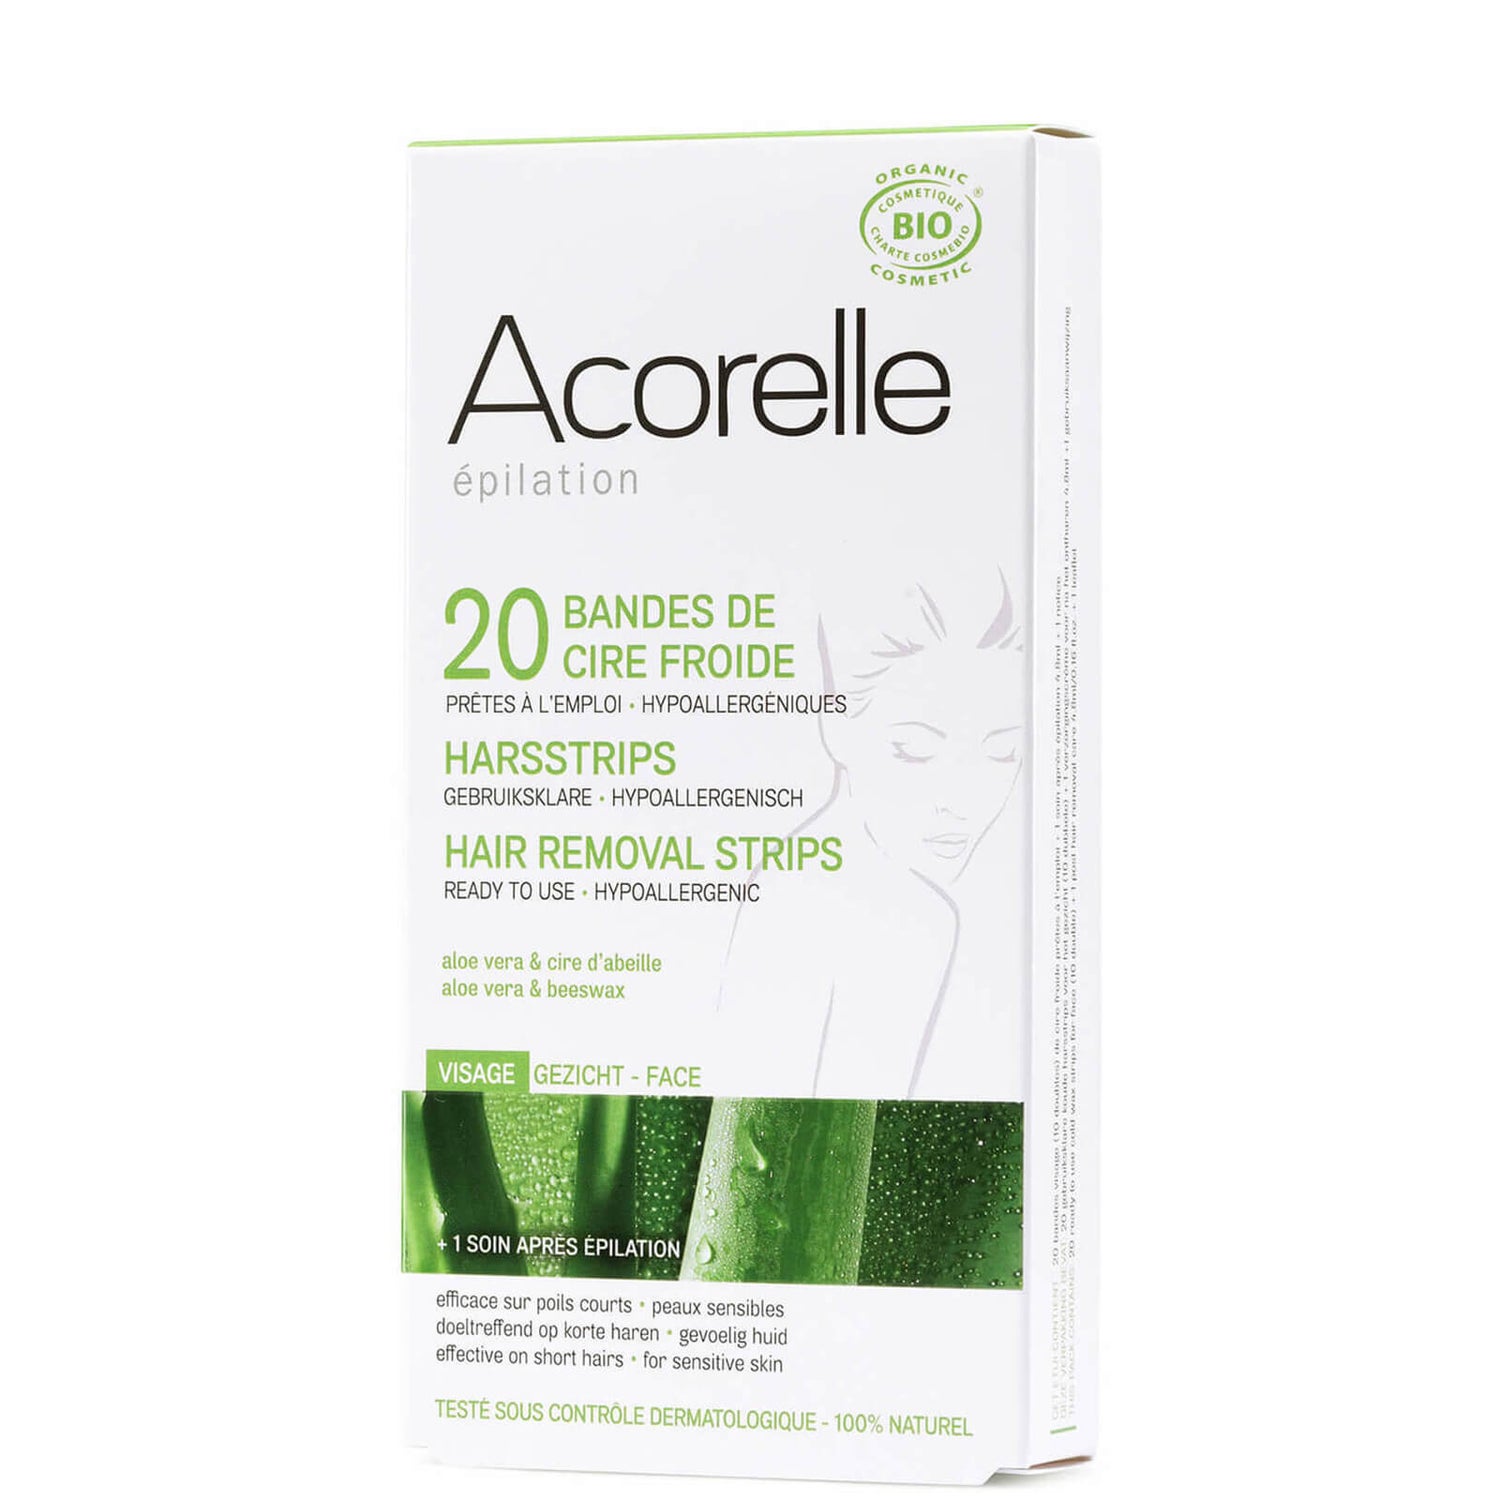 Acorelle Ready to Use Aloe Vera and Beeswax Face Strips - 20 Strips